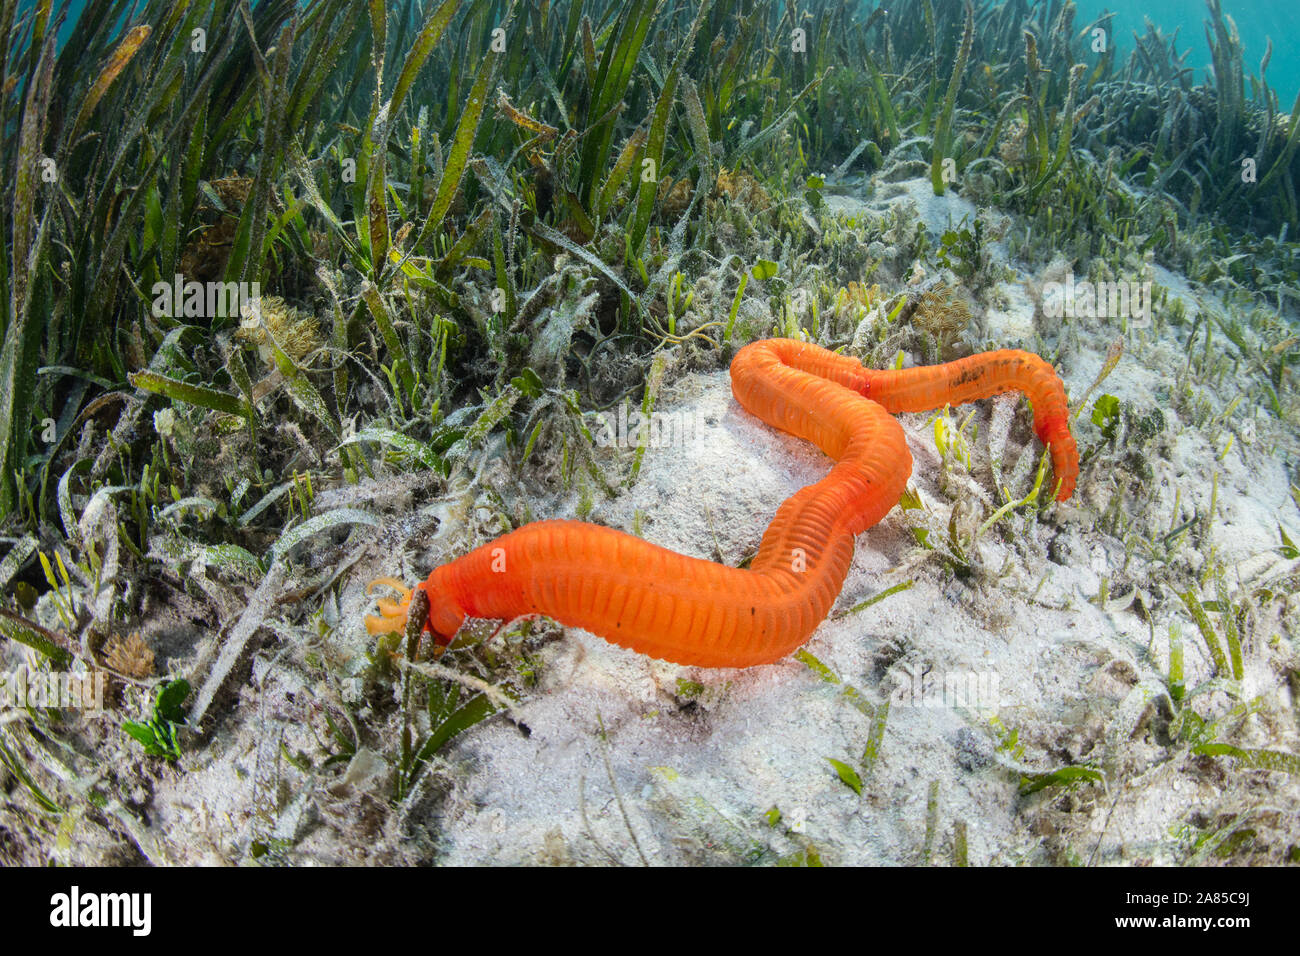 A bright orange sea cucumber, Synaptula sp., uses its feeding tentacles to search for organic debris on the seafloor of a seagrass meadow in Komodo. Stock Photo